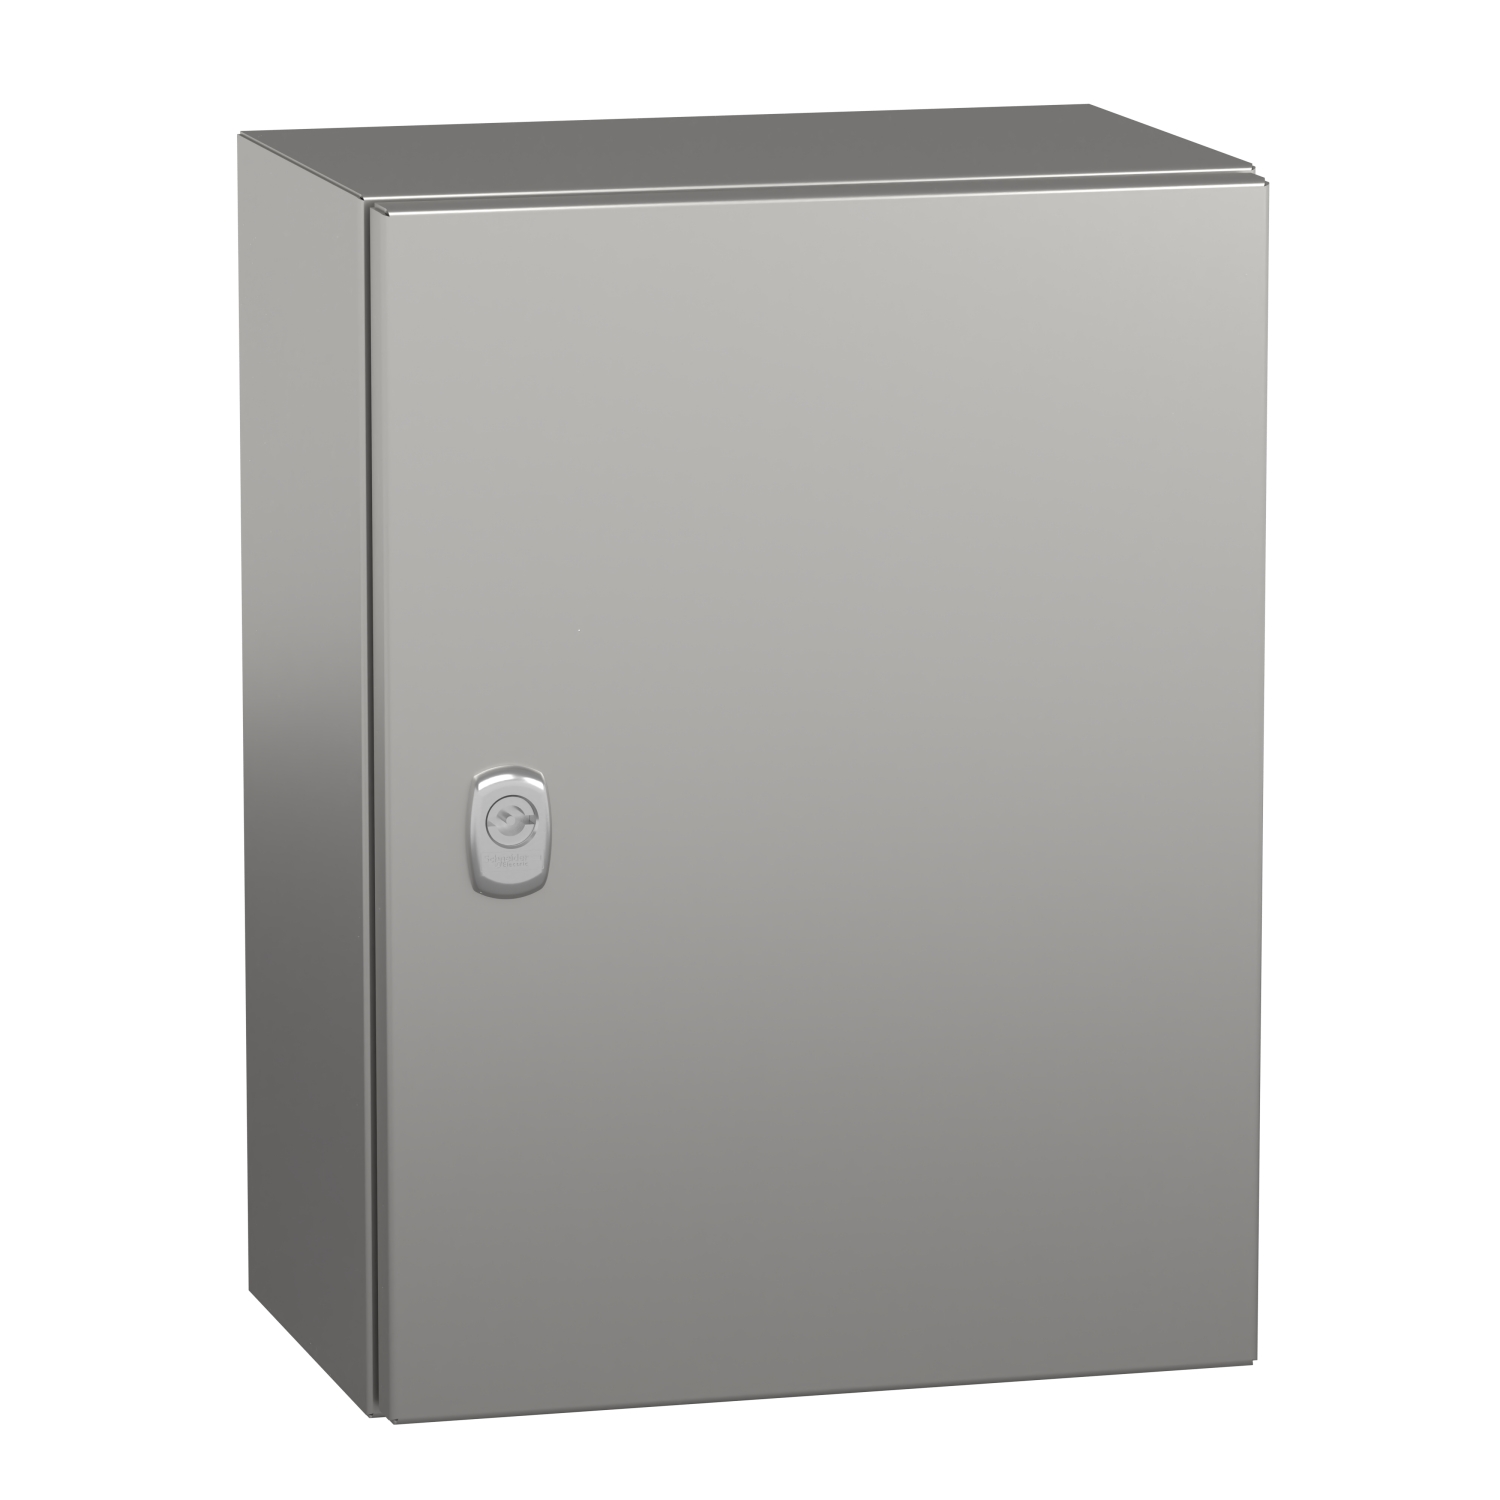 Wall mounted enclosure, Spacial S3X, stainless steel 316L, plain door, 400x300x200mm, IP66